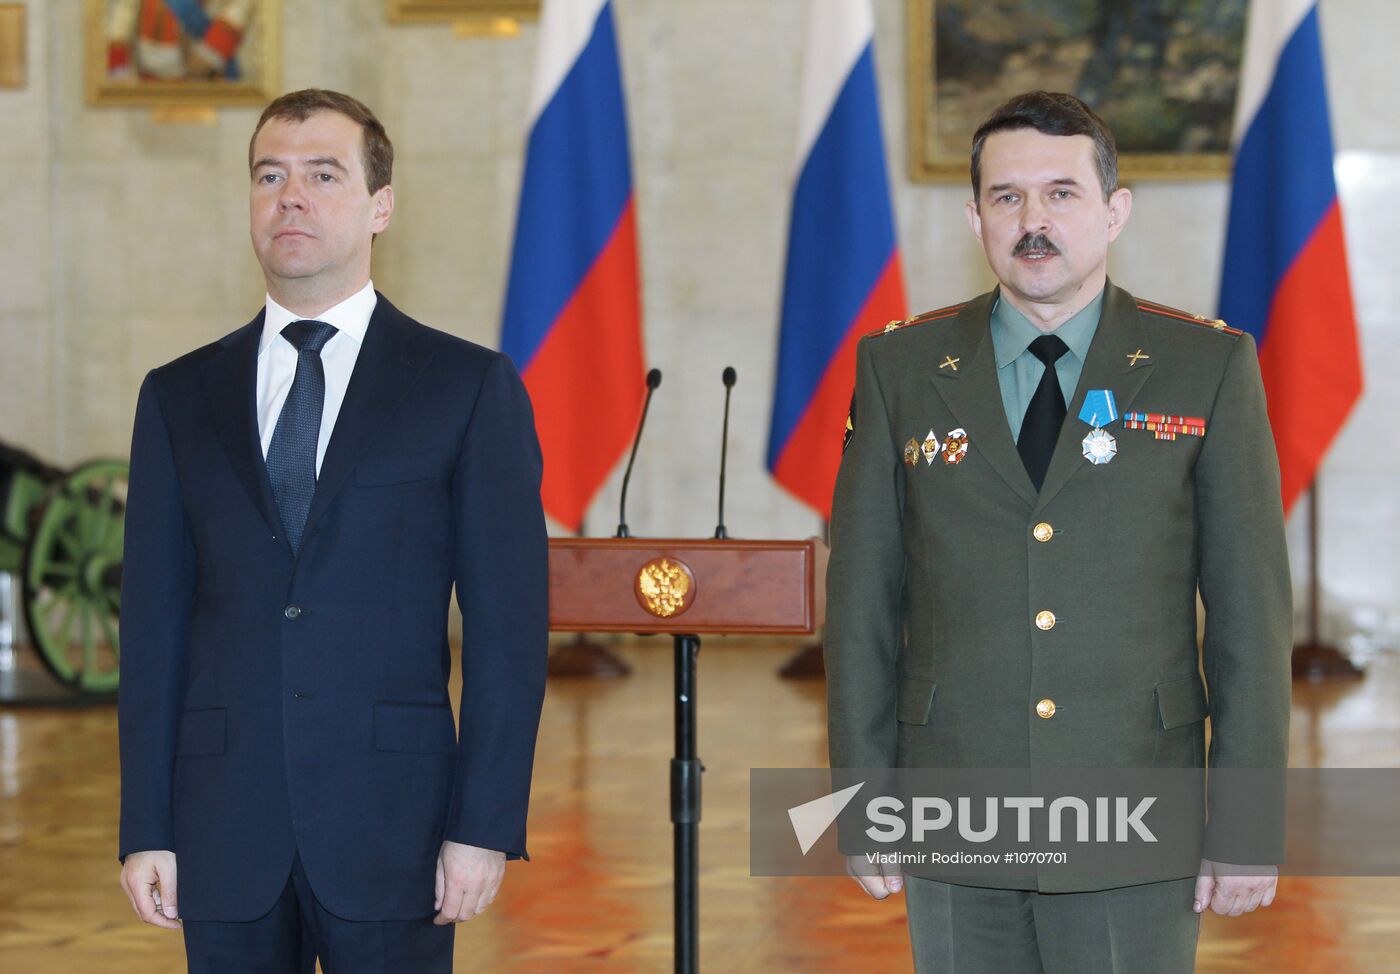 Dmitry Medvedev presents awards to Armed Forces personnel